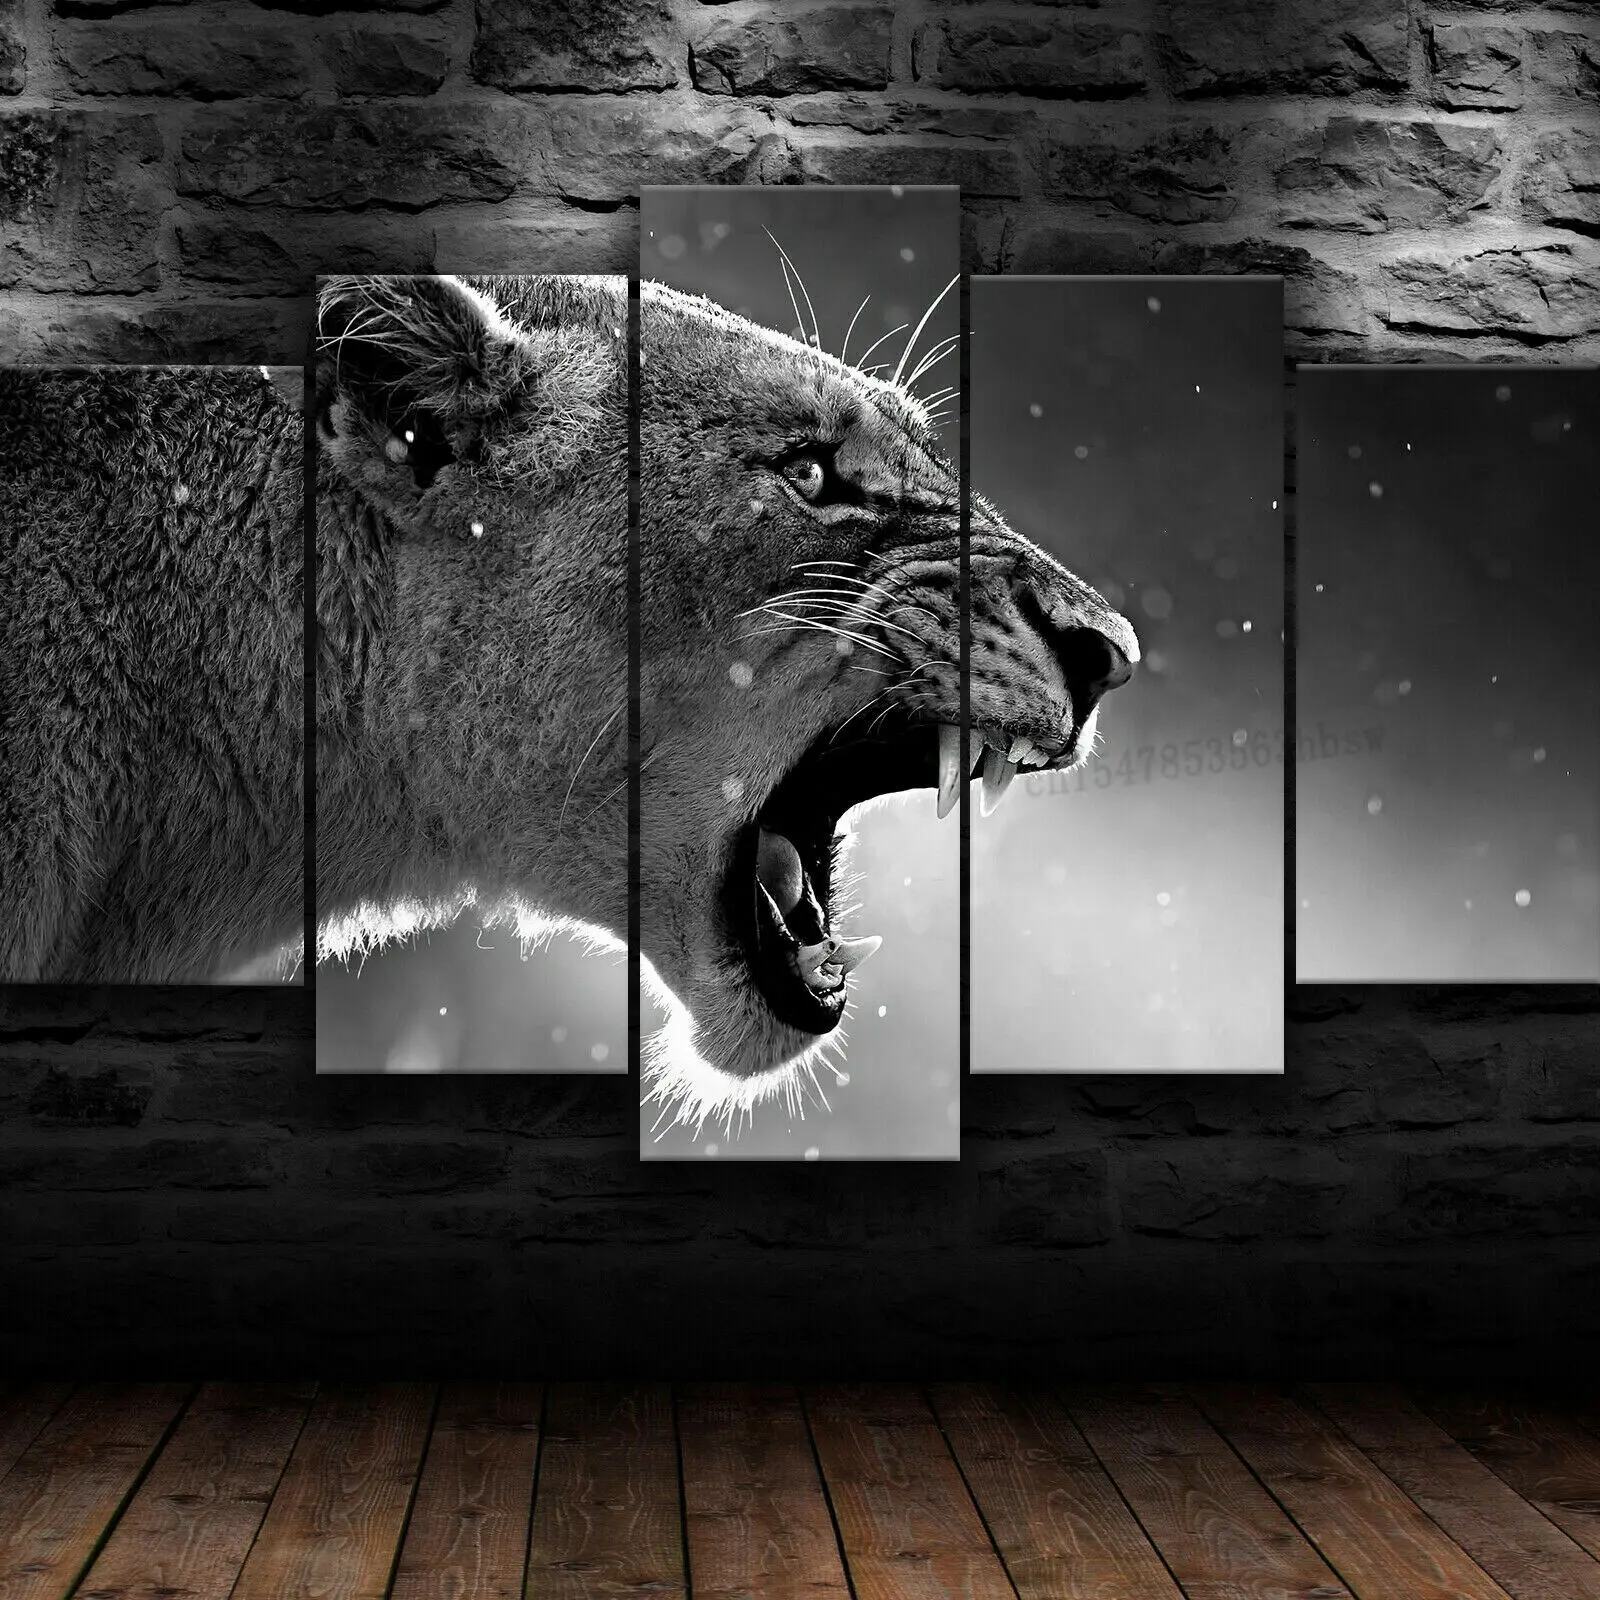 

Wild Lion Roaring Nature 5 Panel Canvas Print Wall Art Poster Home Decoration HD Print Home Decor 5 Piece Paintings Pictures